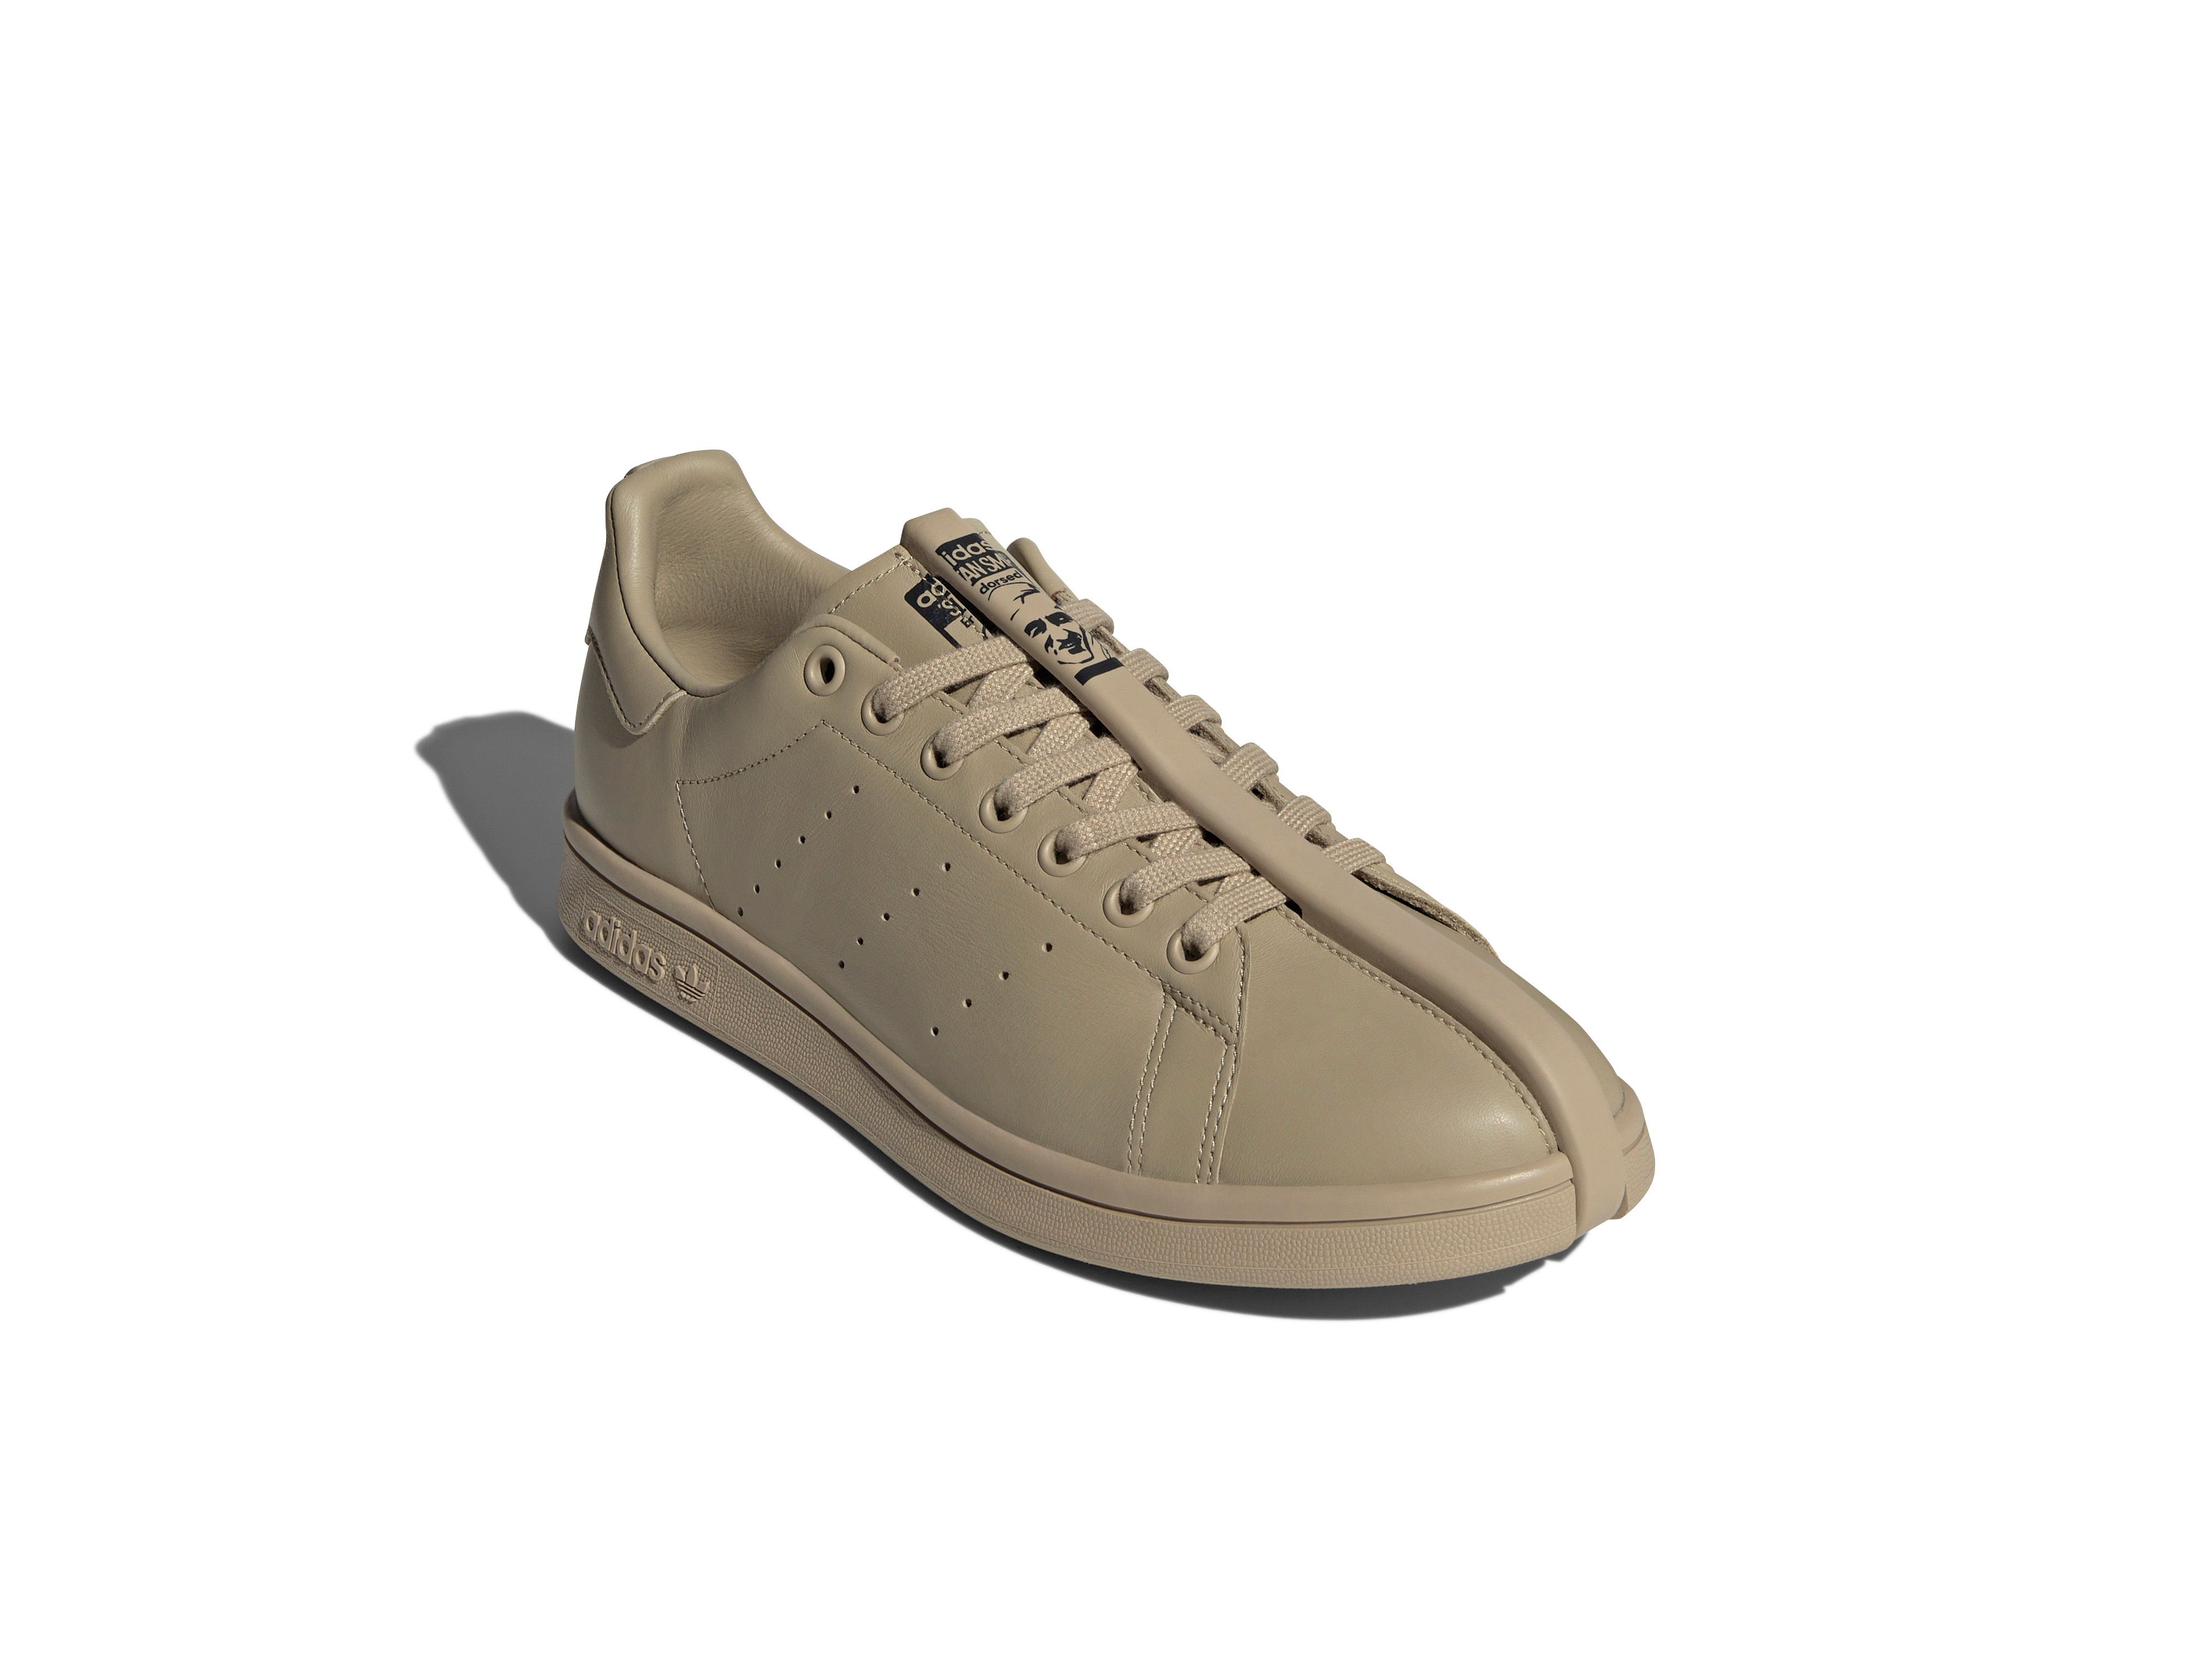 sitesupply.co Craig Green x Adidas Stan Smith Collection Release Info